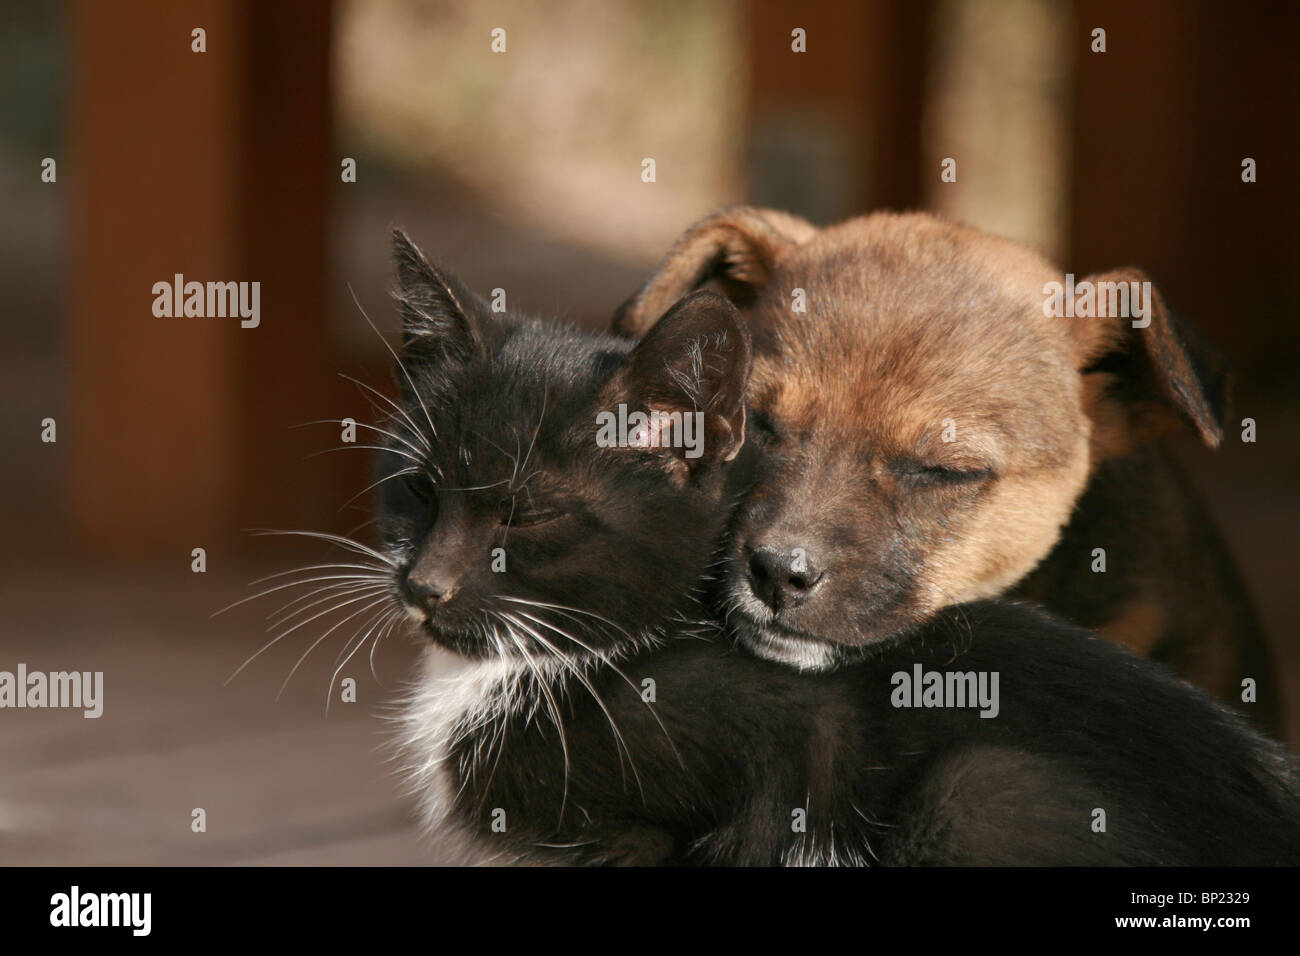 Kitten and puppy dreaming together Stock Photo